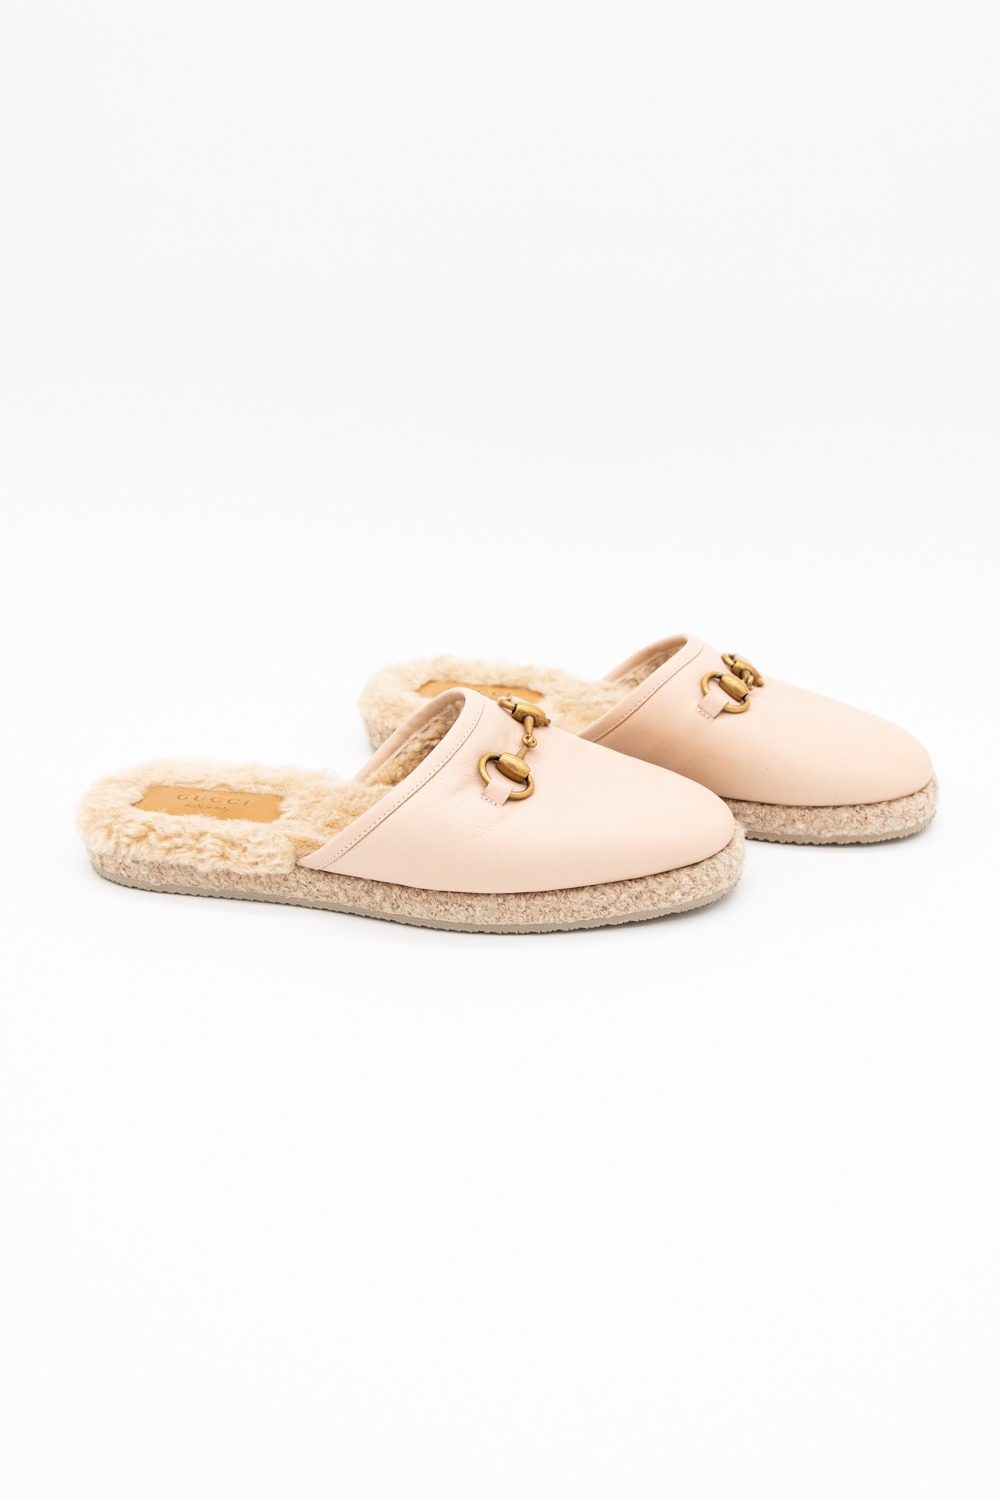 Thumbnail of http://Gucci%20Pantolette%20in%20Beige